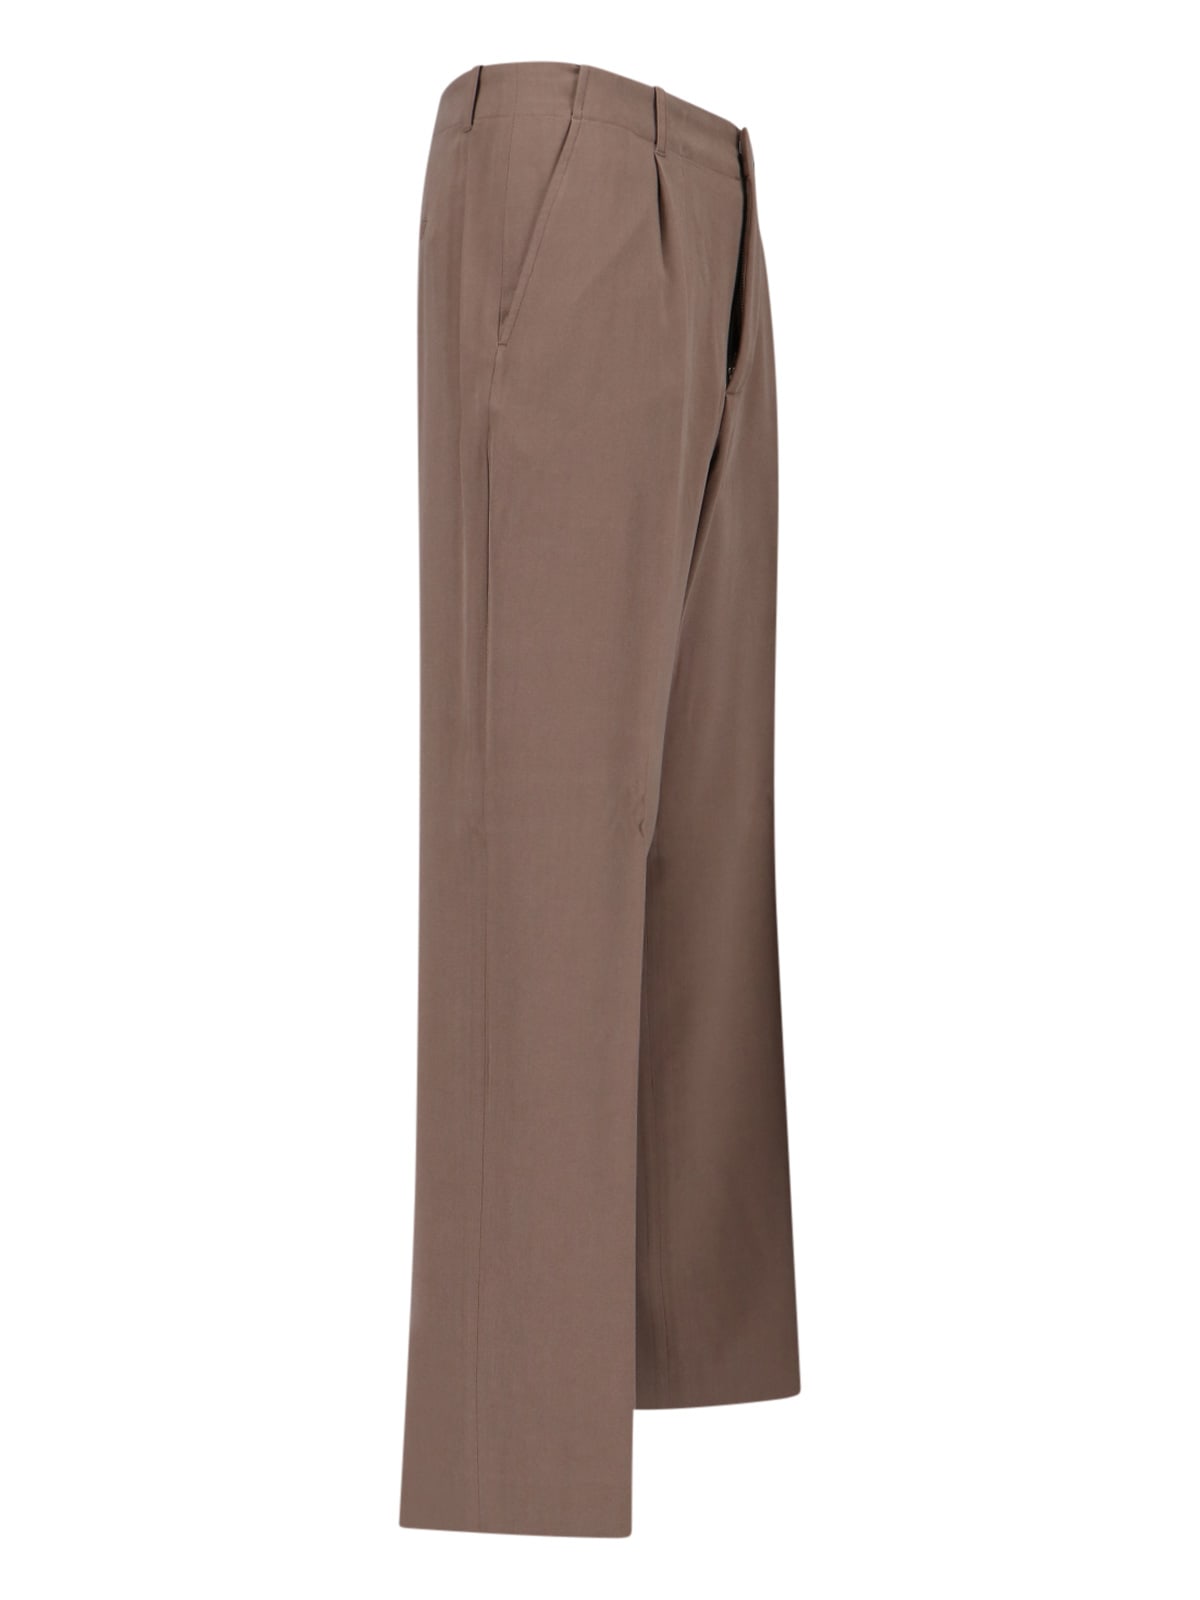 Shop Our Legacy Tailored Wool Blend Trousers In Brown